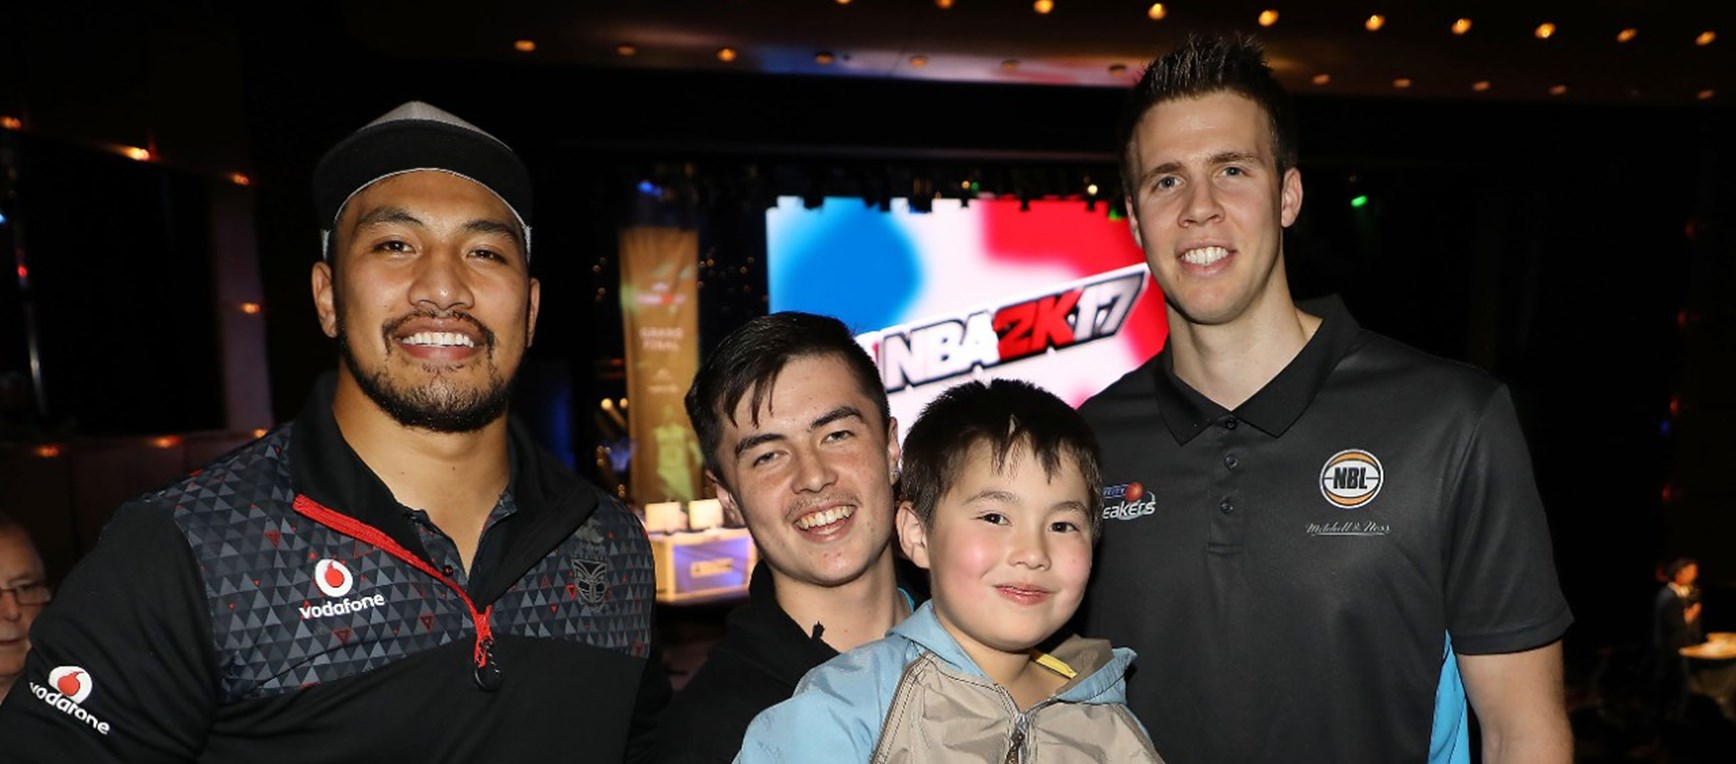 NBA2K final at SKYCITY in pictures